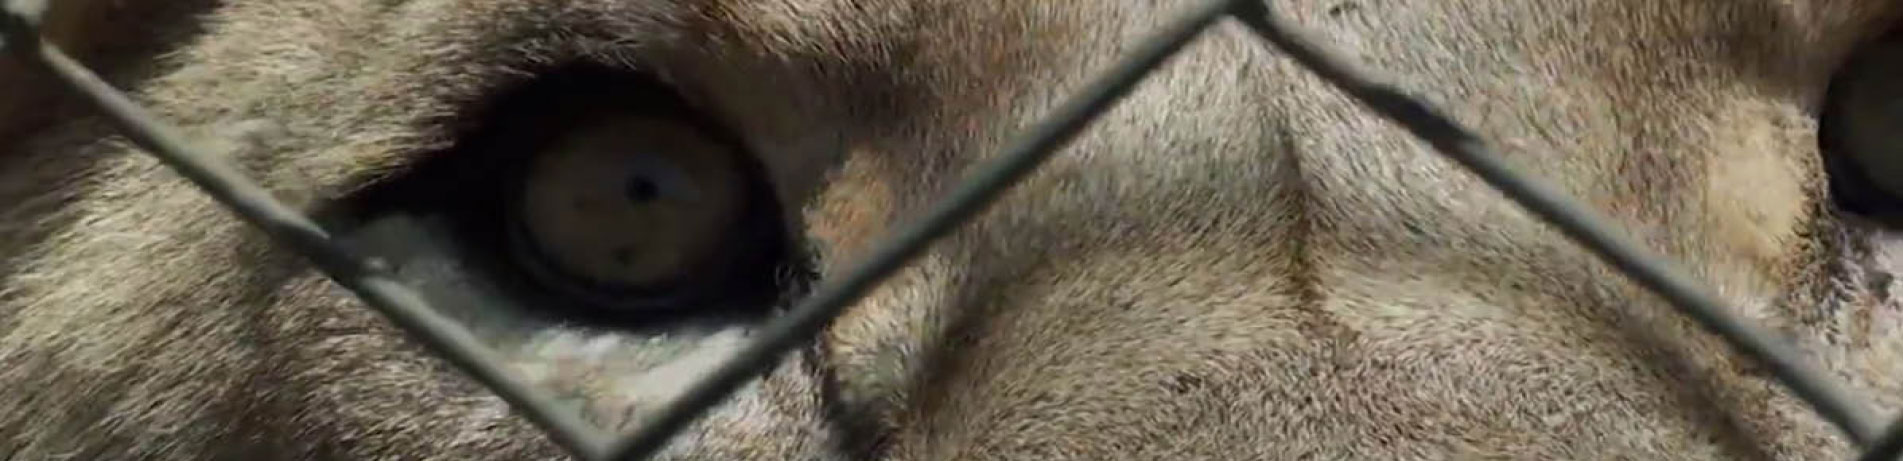 Close-up image of a captive lion behind a fence